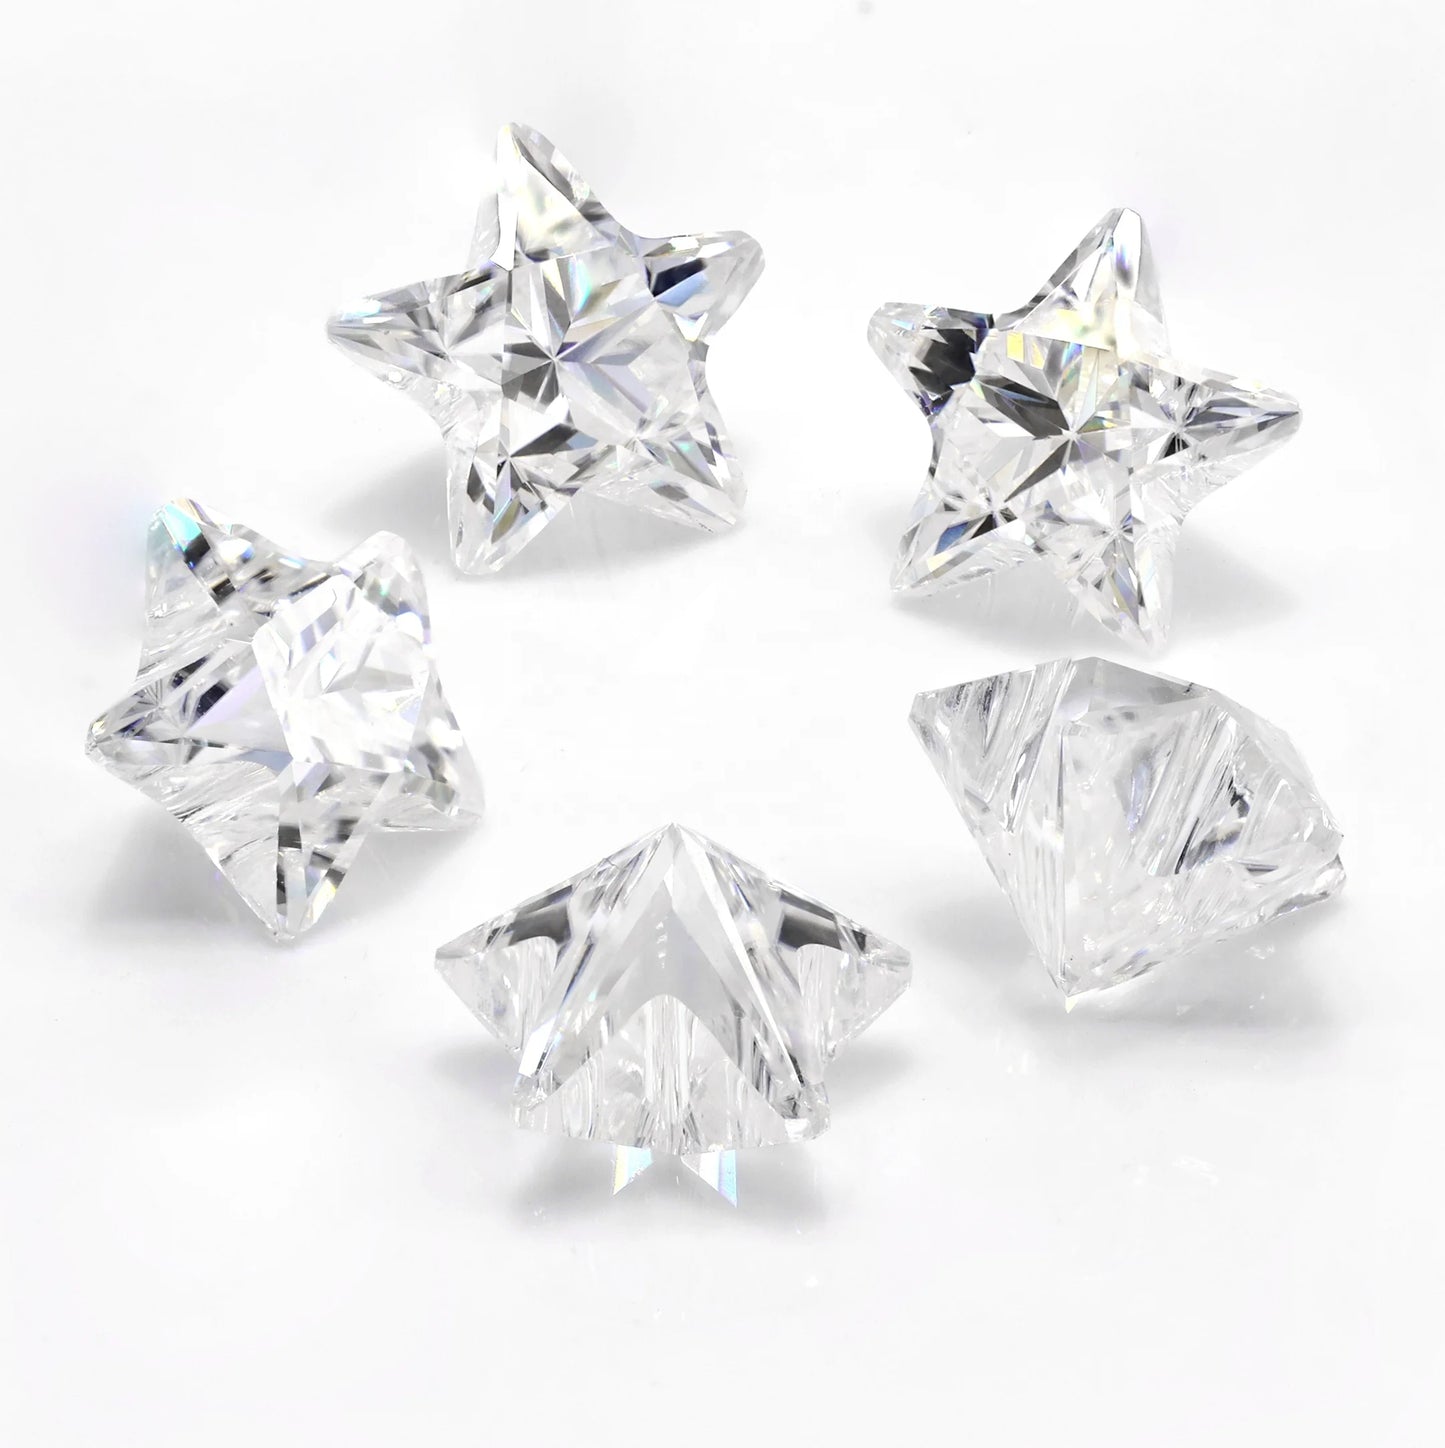 Star Cut Moissanite Loose Stone - Luther's Diamonds